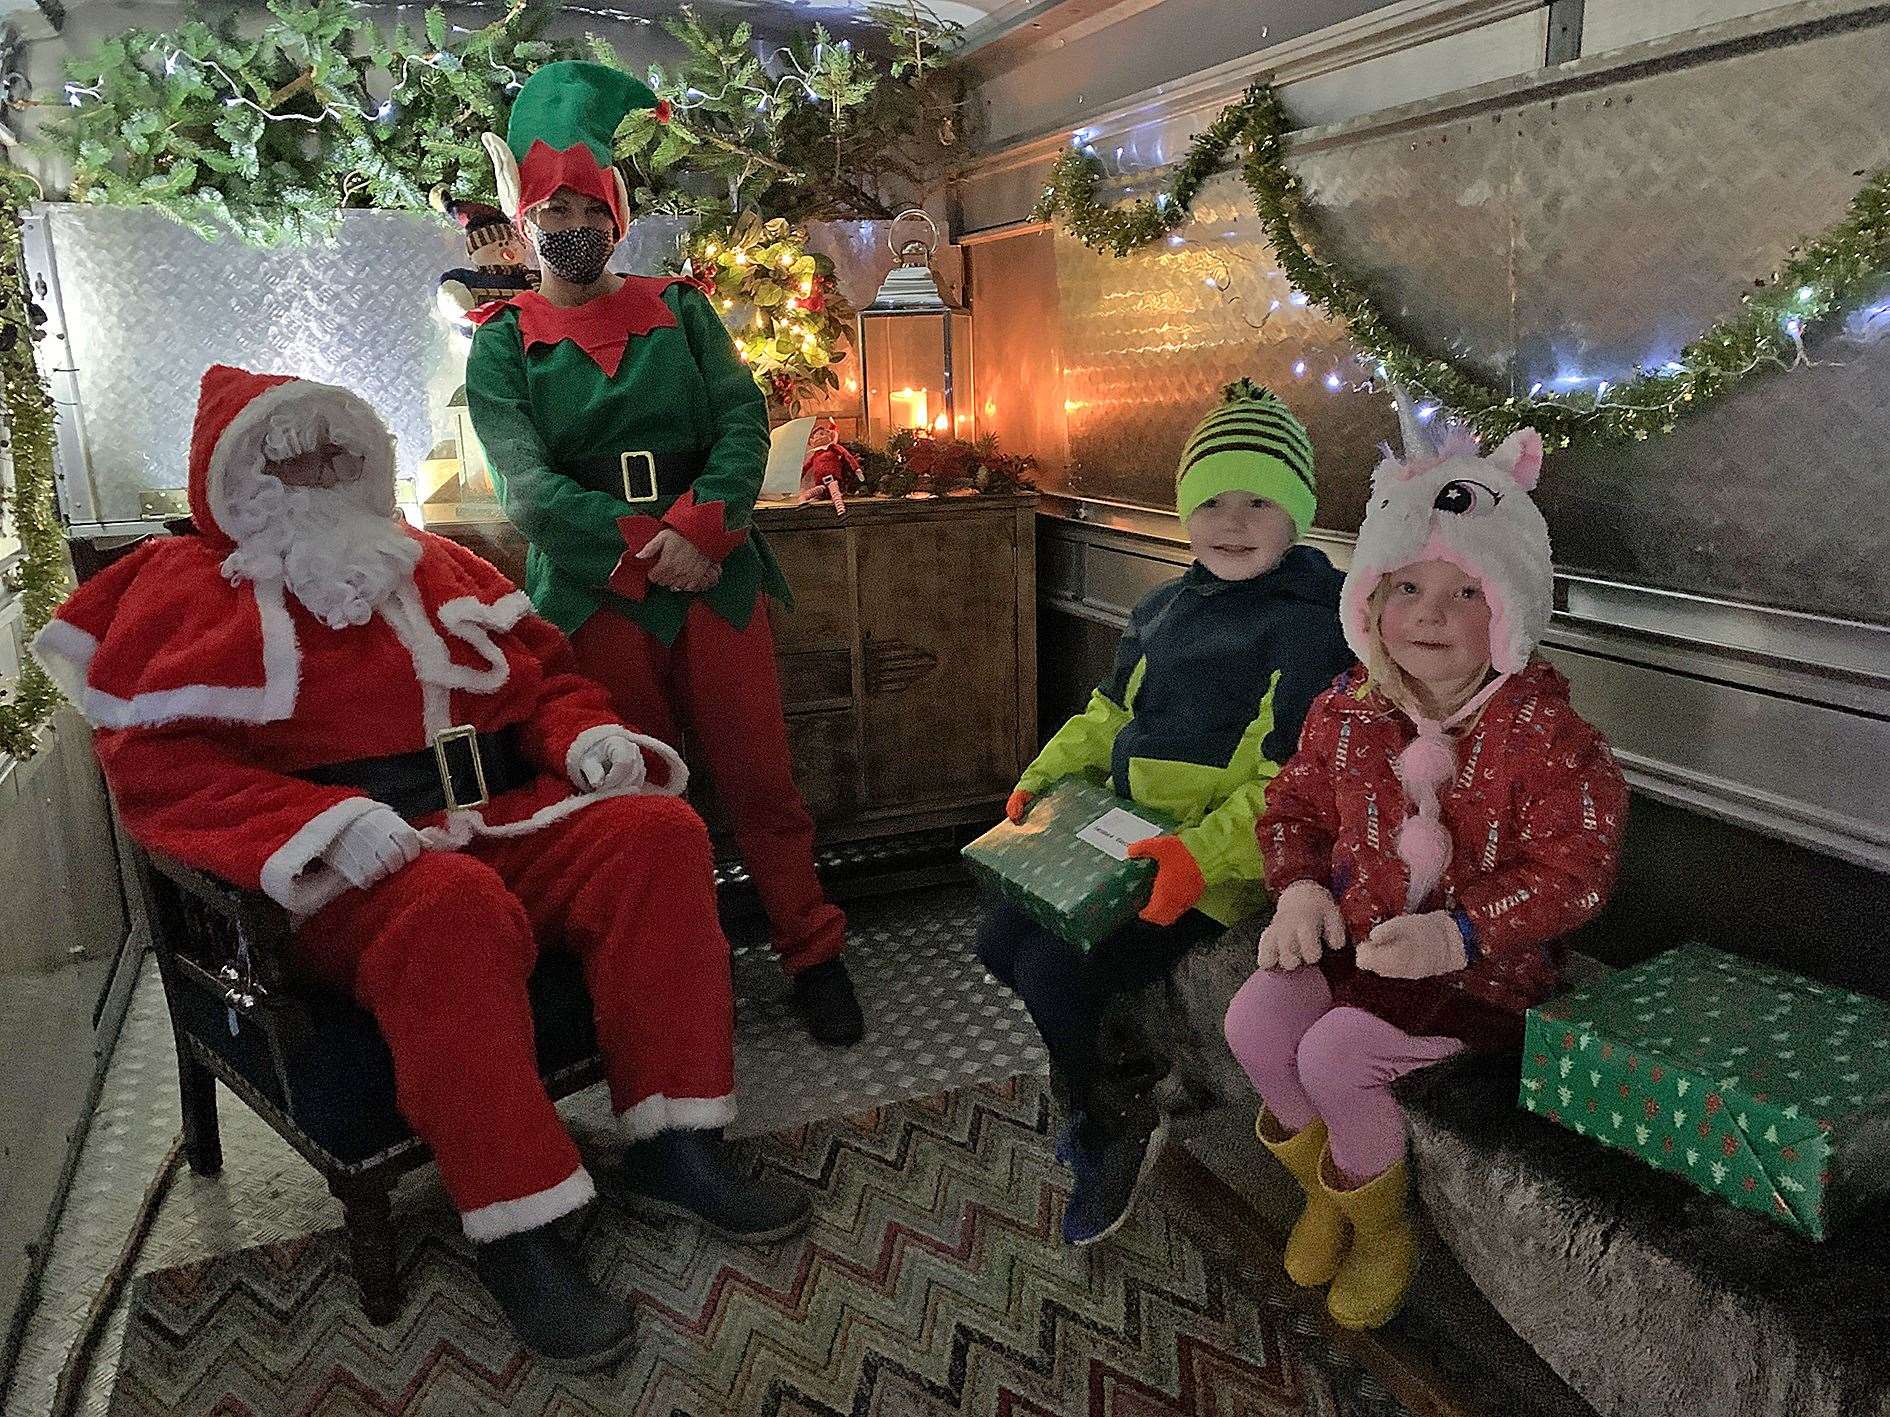 Seumas and Keeva Kerr were excited to meet Santa and an elf.